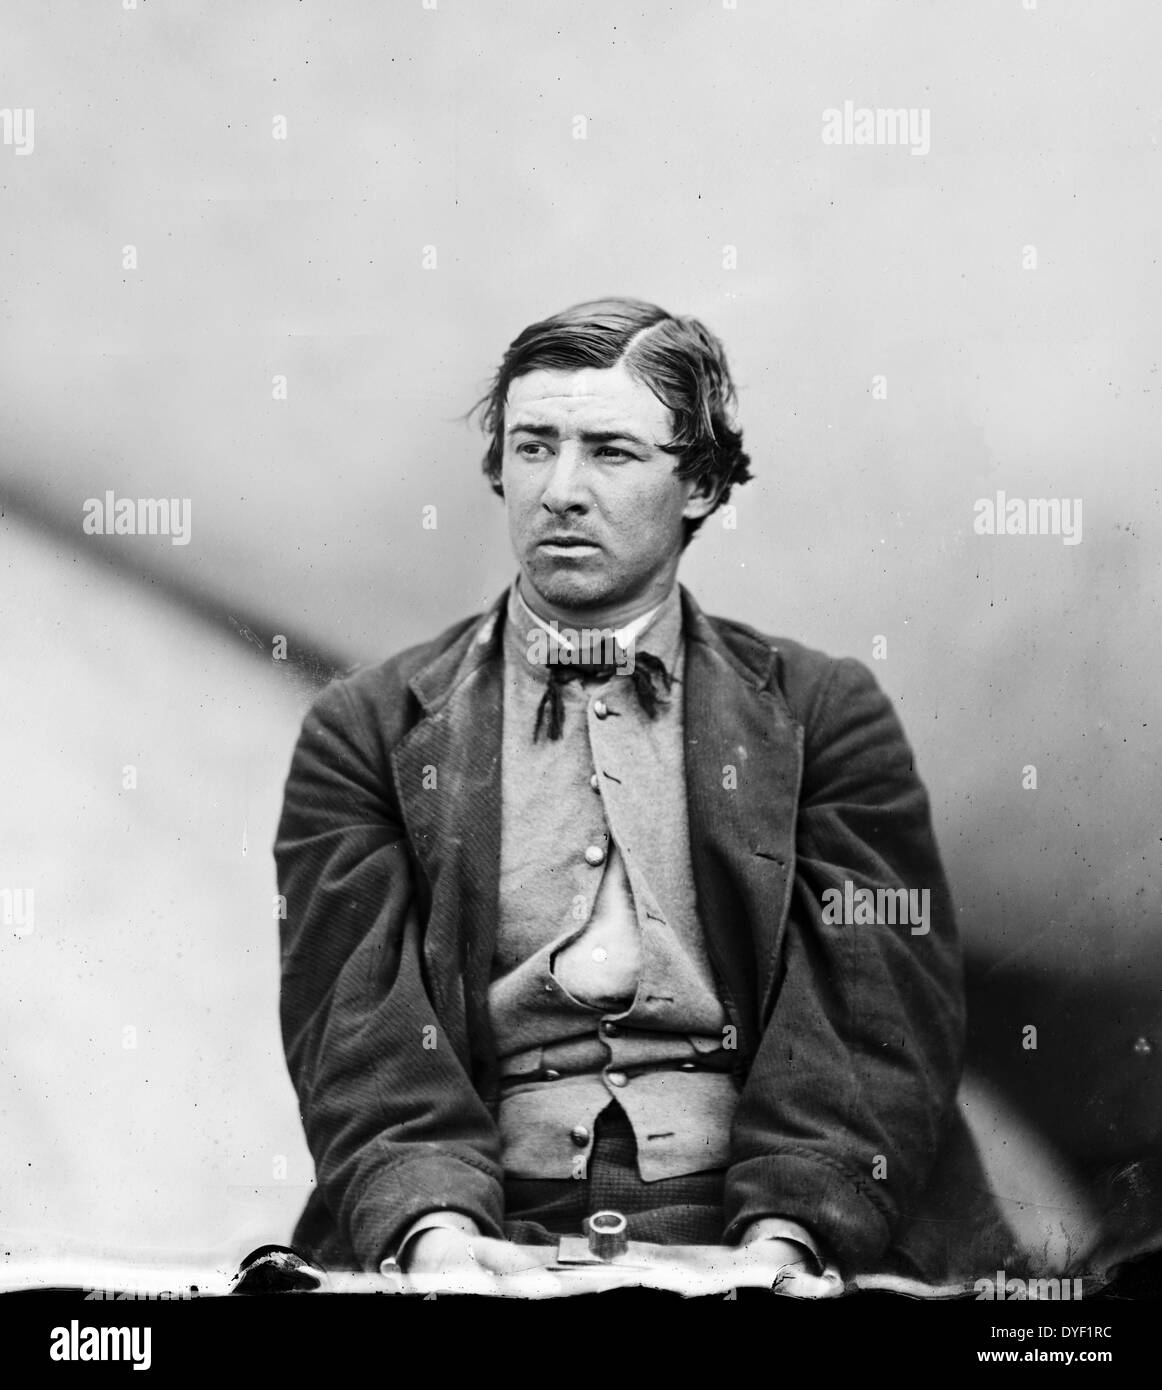 David Edgar Herold (June 16, 1842 – July 7, 1865) accomplice of John Wilkes Booth in the assassination of Abraham Lincoln. Stock Photo